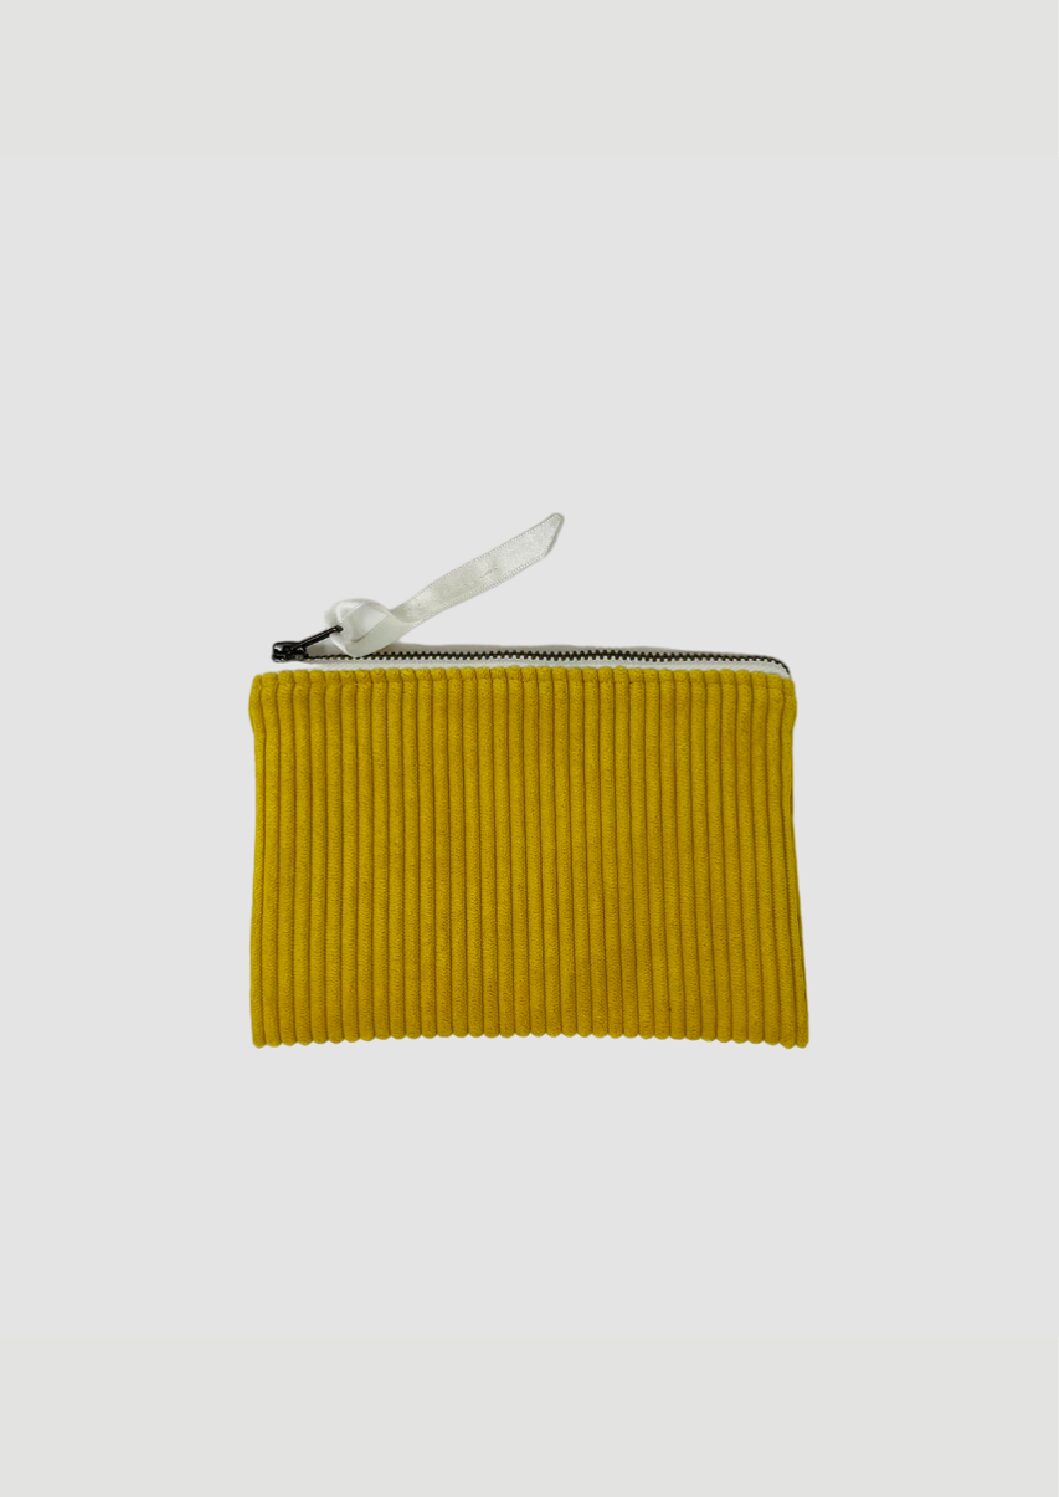 YELLOW PASSPORT POUCH made in France - Louvreuse